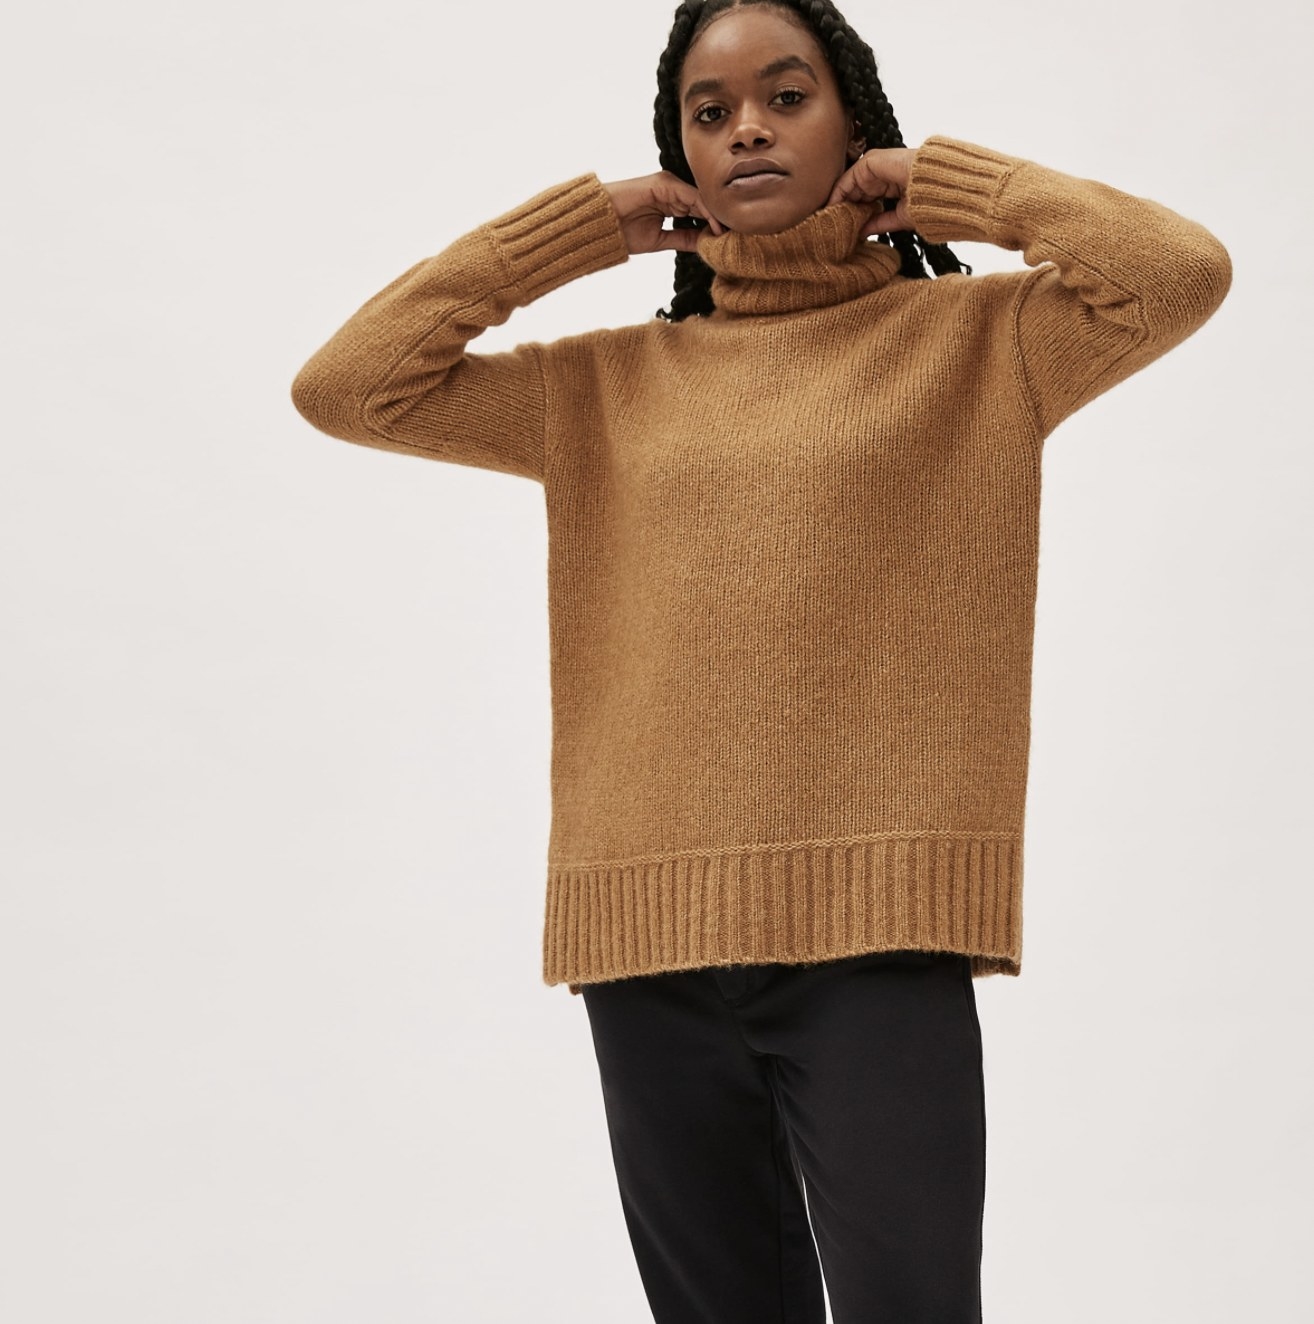 A model wearing the high cut beige turtleneck with leggings